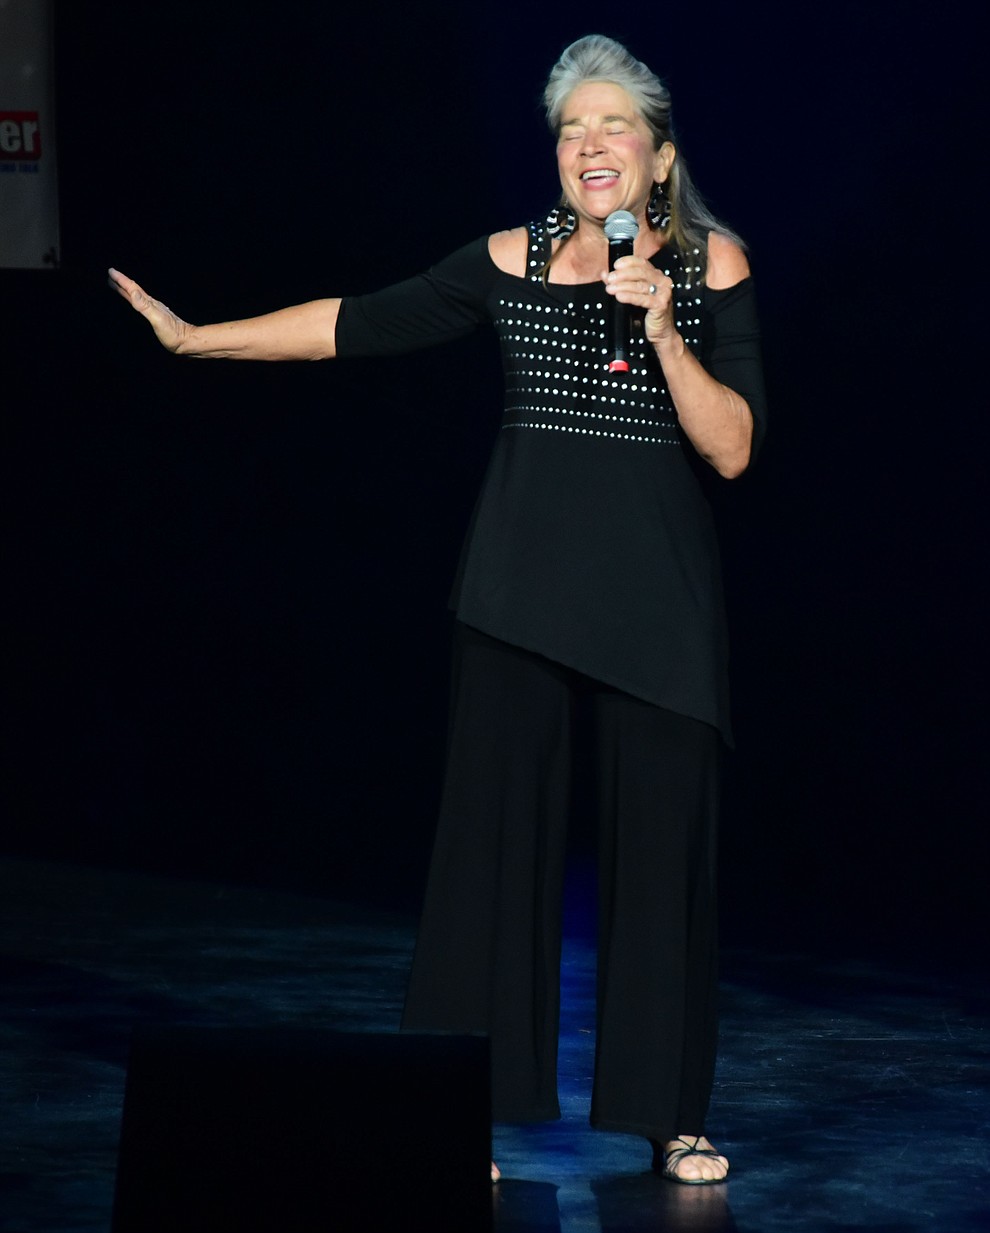 Lore Christensen sings "Let it Go" during the finale of the 8th annual Prescott Idol competition at the Yavapai College Performance Hall Wednesday, September 6 in Prescott . (Les Stukenberg/Courier).